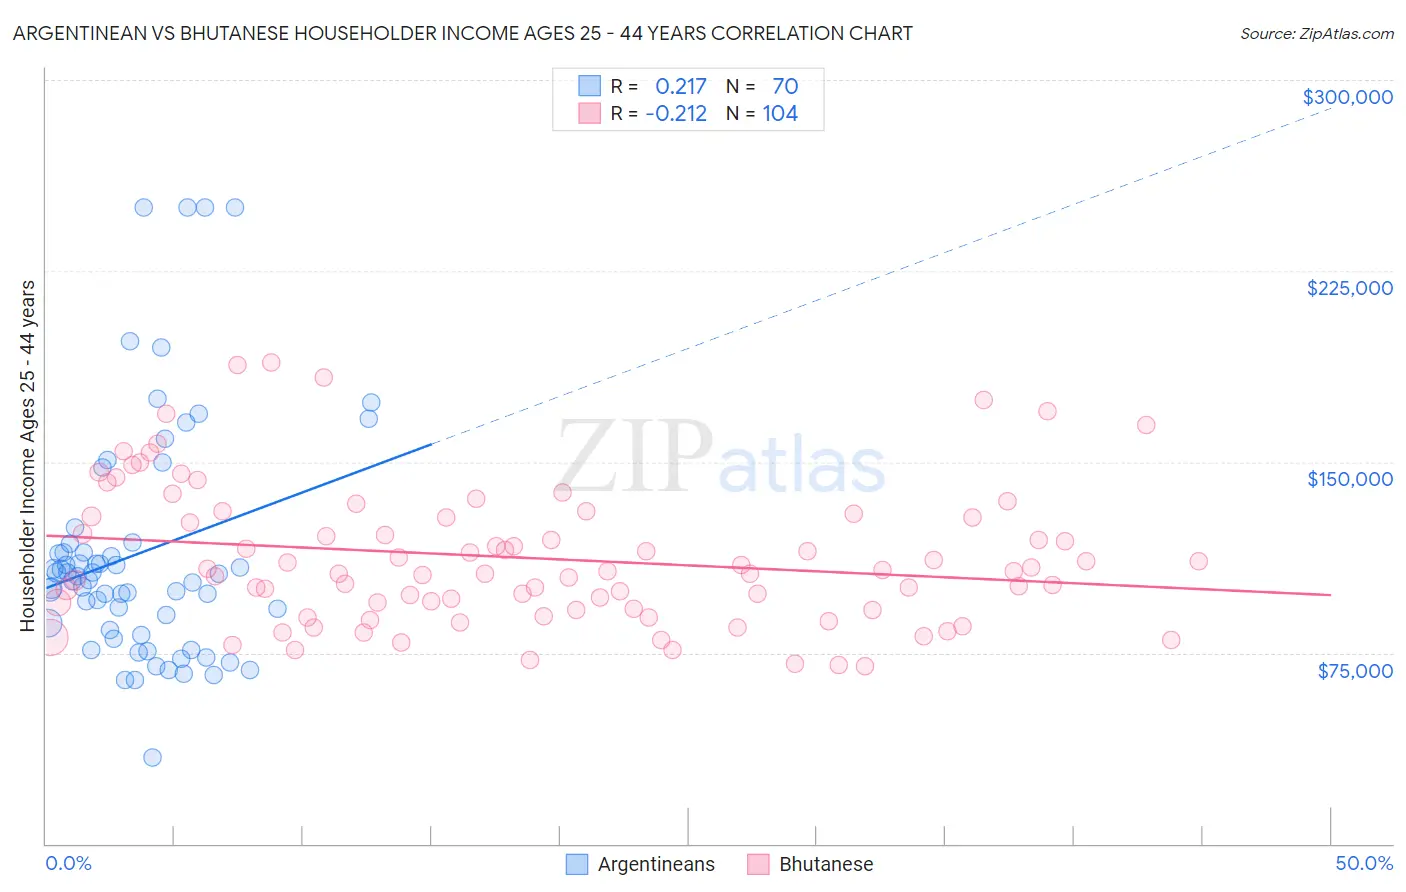 Argentinean vs Bhutanese Householder Income Ages 25 - 44 years